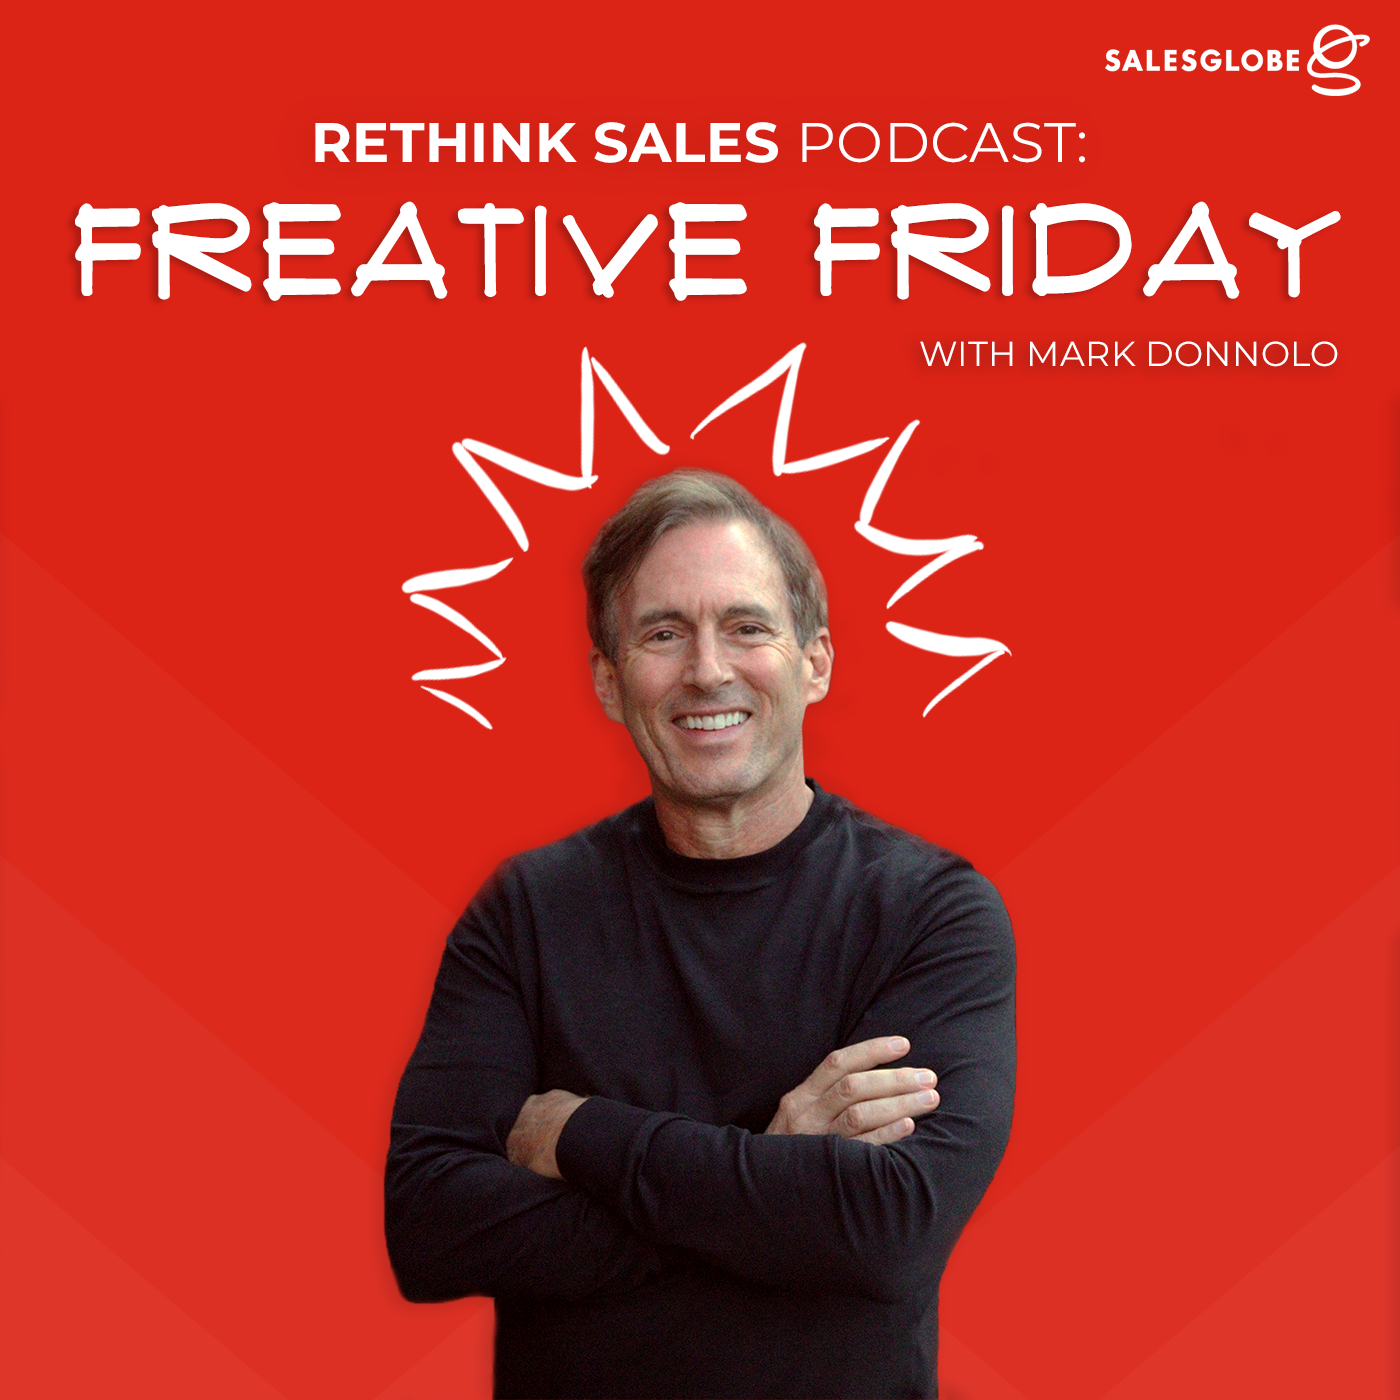 75: Freative Friday - Storytelling for Strategic Accounts: The Simple Formula for a Great Story